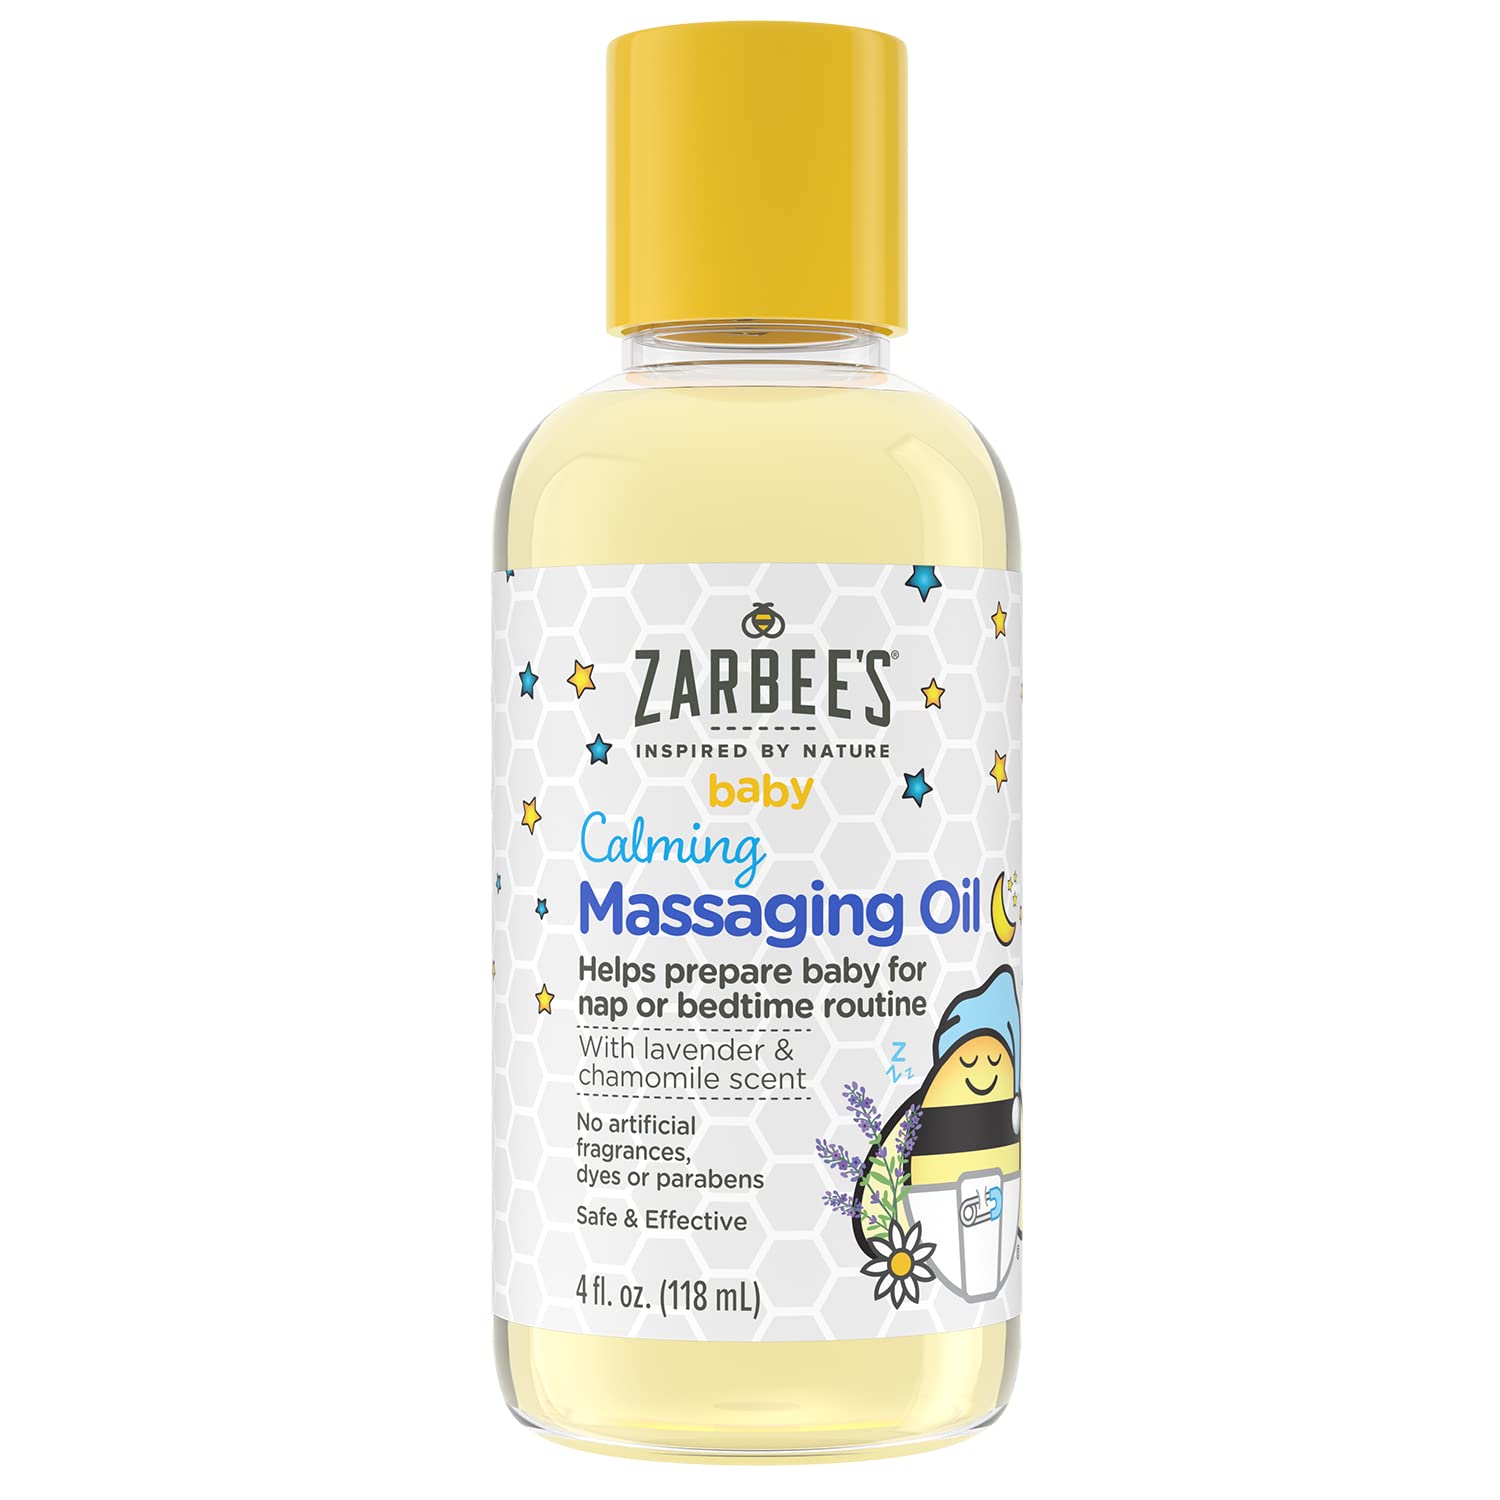 Zarbee's Baby Massage Oil, Calming and Soothing with Lavender and Chamomile to Help Sleep, 4oz Bottle